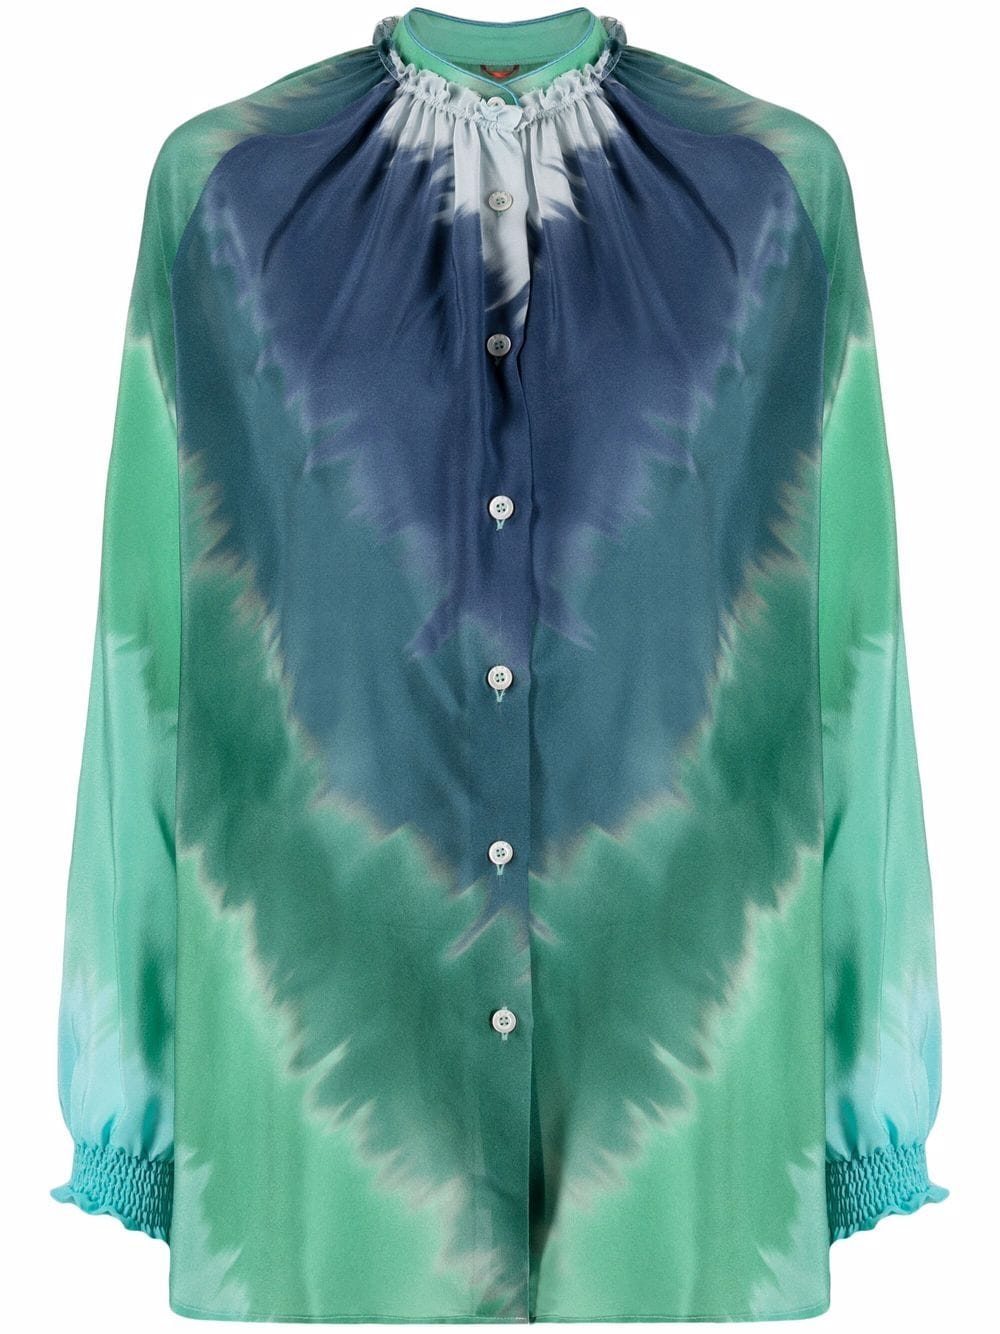 F.R.S For Restless Sleepers tie-dye print ruffled-collar silk blouse - Green von F.R.S For Restless Sleepers